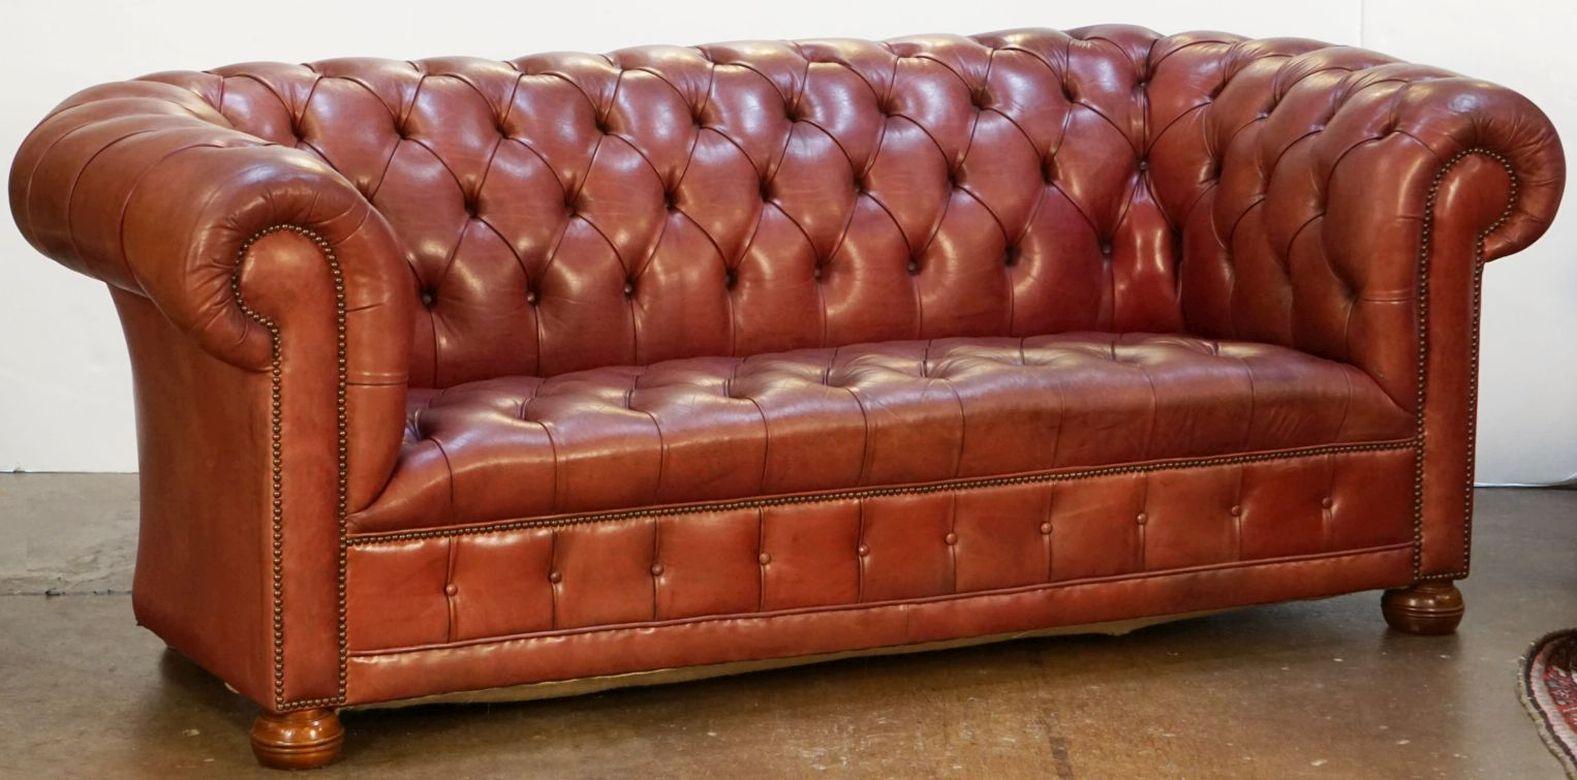 A fine, large vintage English Chesterfield sofa upholstered in original patinated cordovan pale red-brown soft hide leather - featuring a deep button-tufted back, scroll arms, and comfortable seat, with matching buttoned valance to the front, the